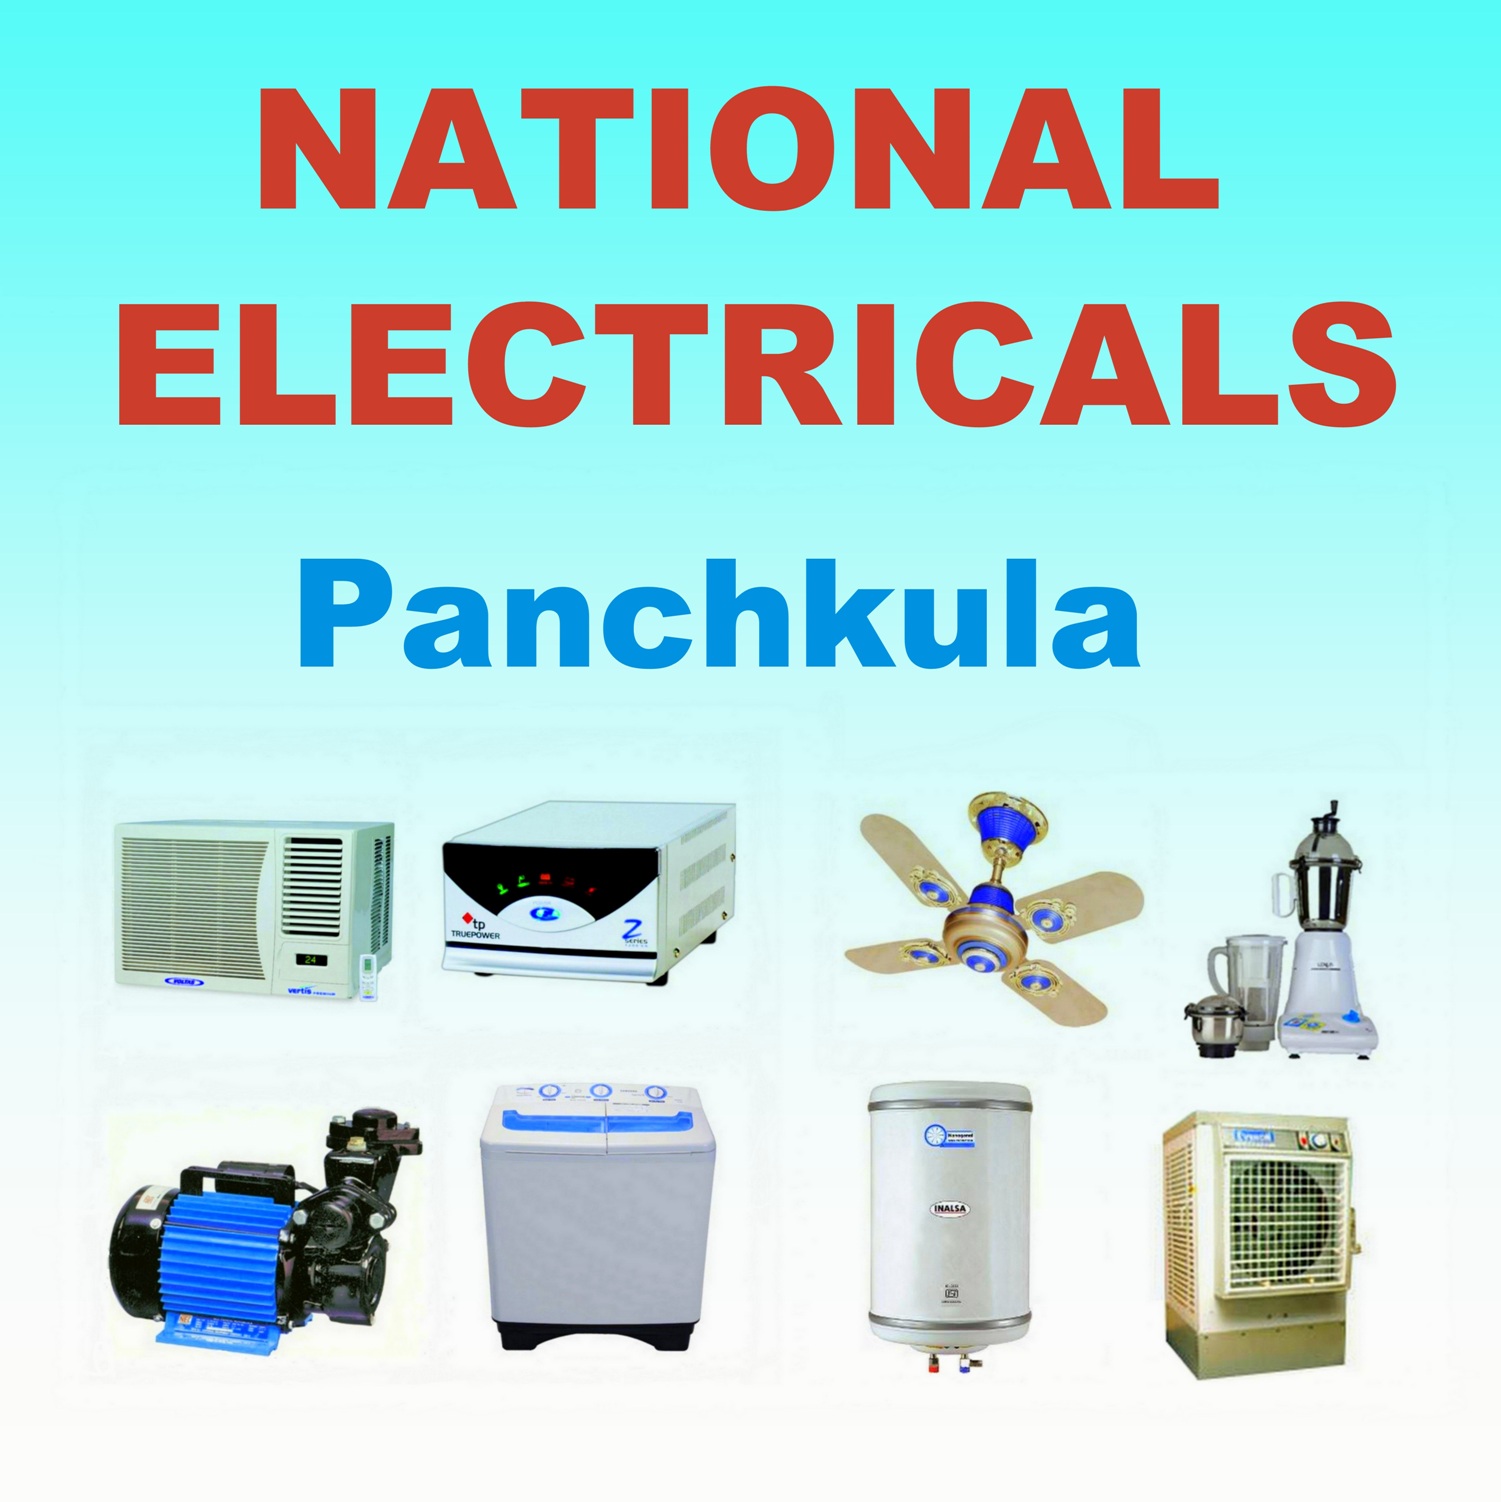 National Electricals